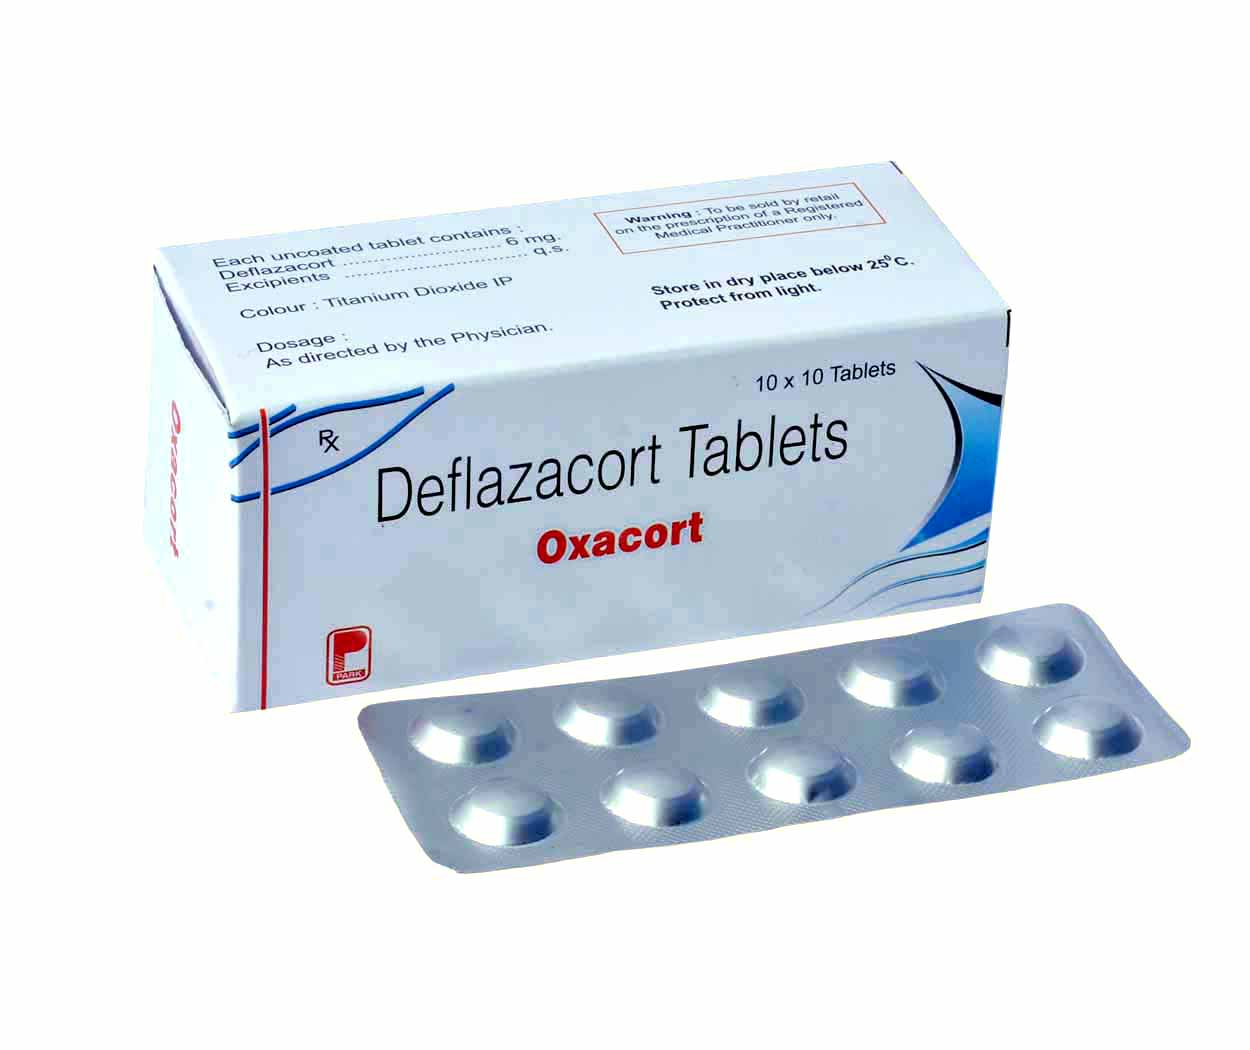 Product Name: Oxacort, Compositions of Oxacort are Deflazacort Tablets - Park Pharmaceuticals